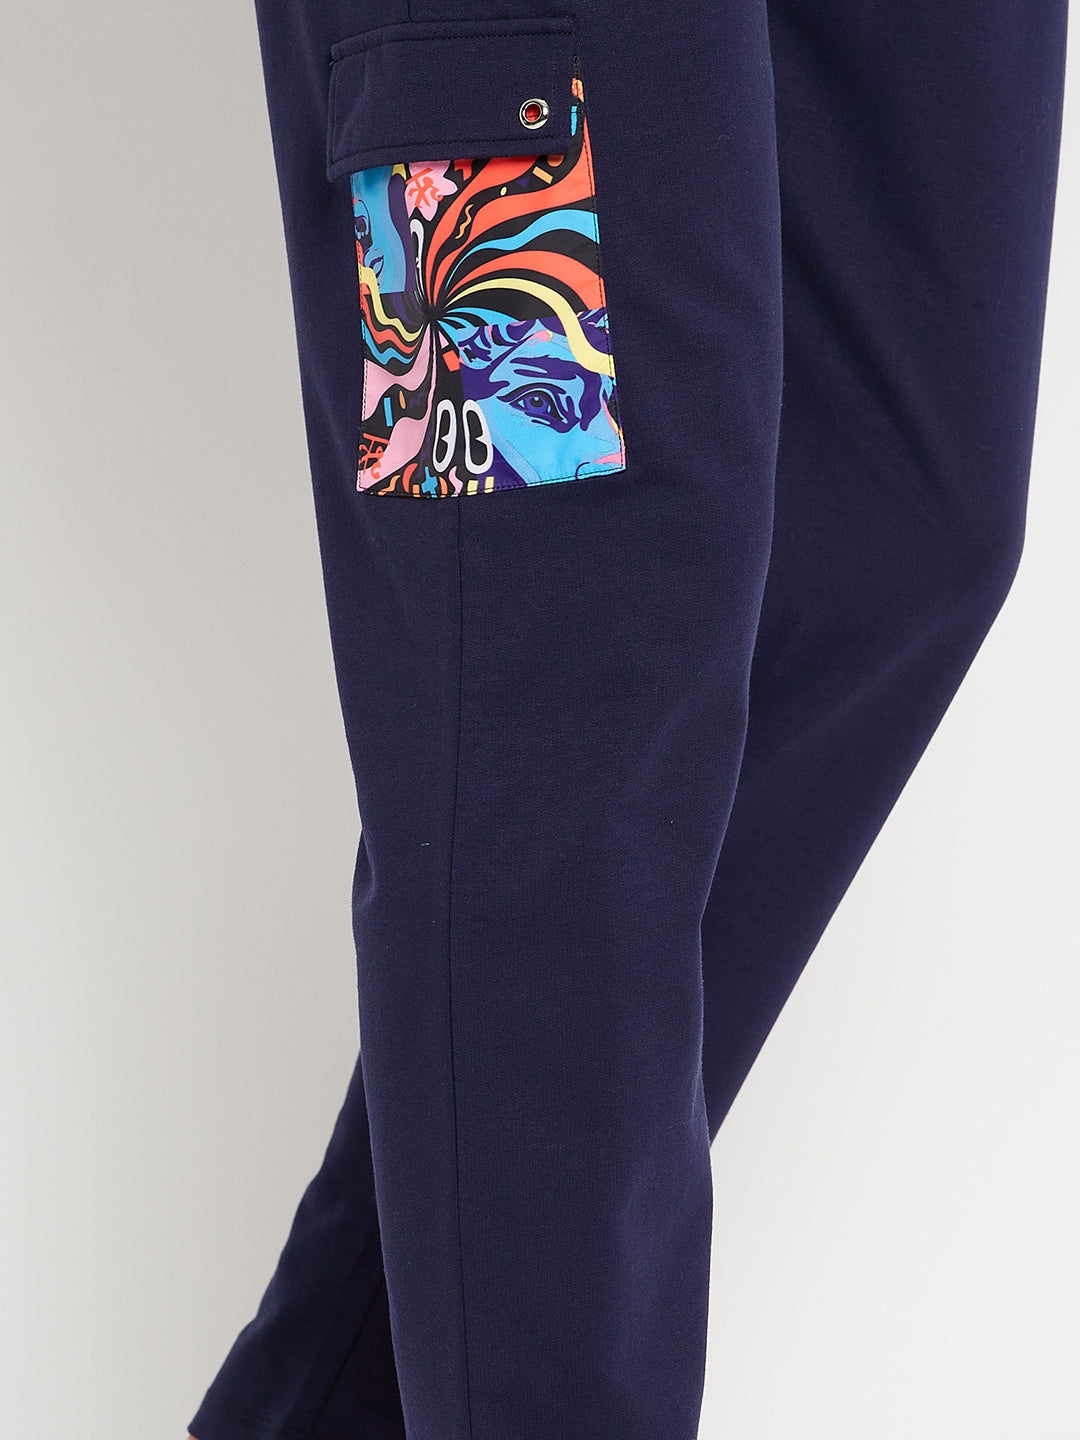 Relaxed Fit Navy Tracksuit with Edrio Print